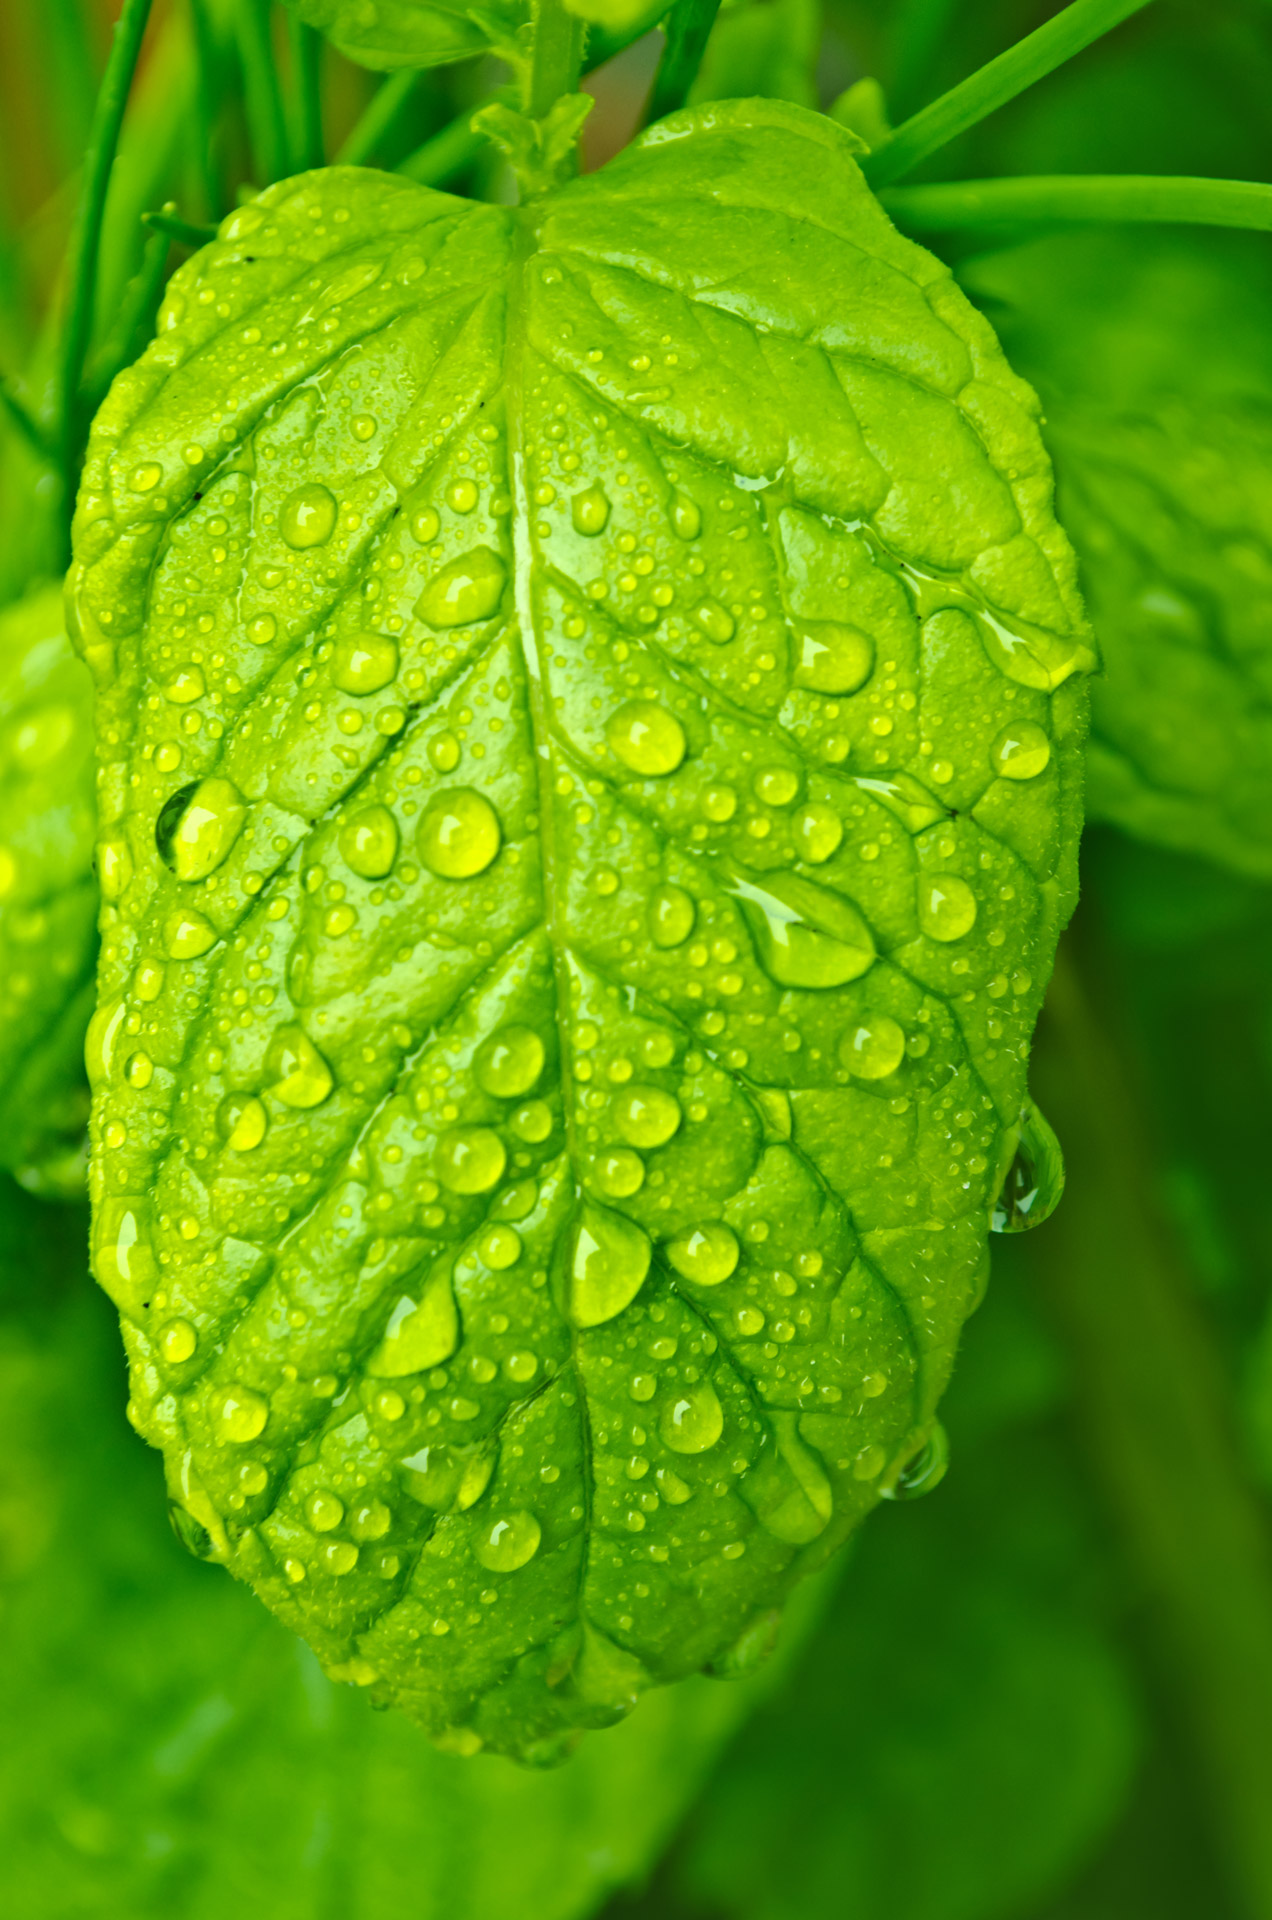 Water drops on The Leaf